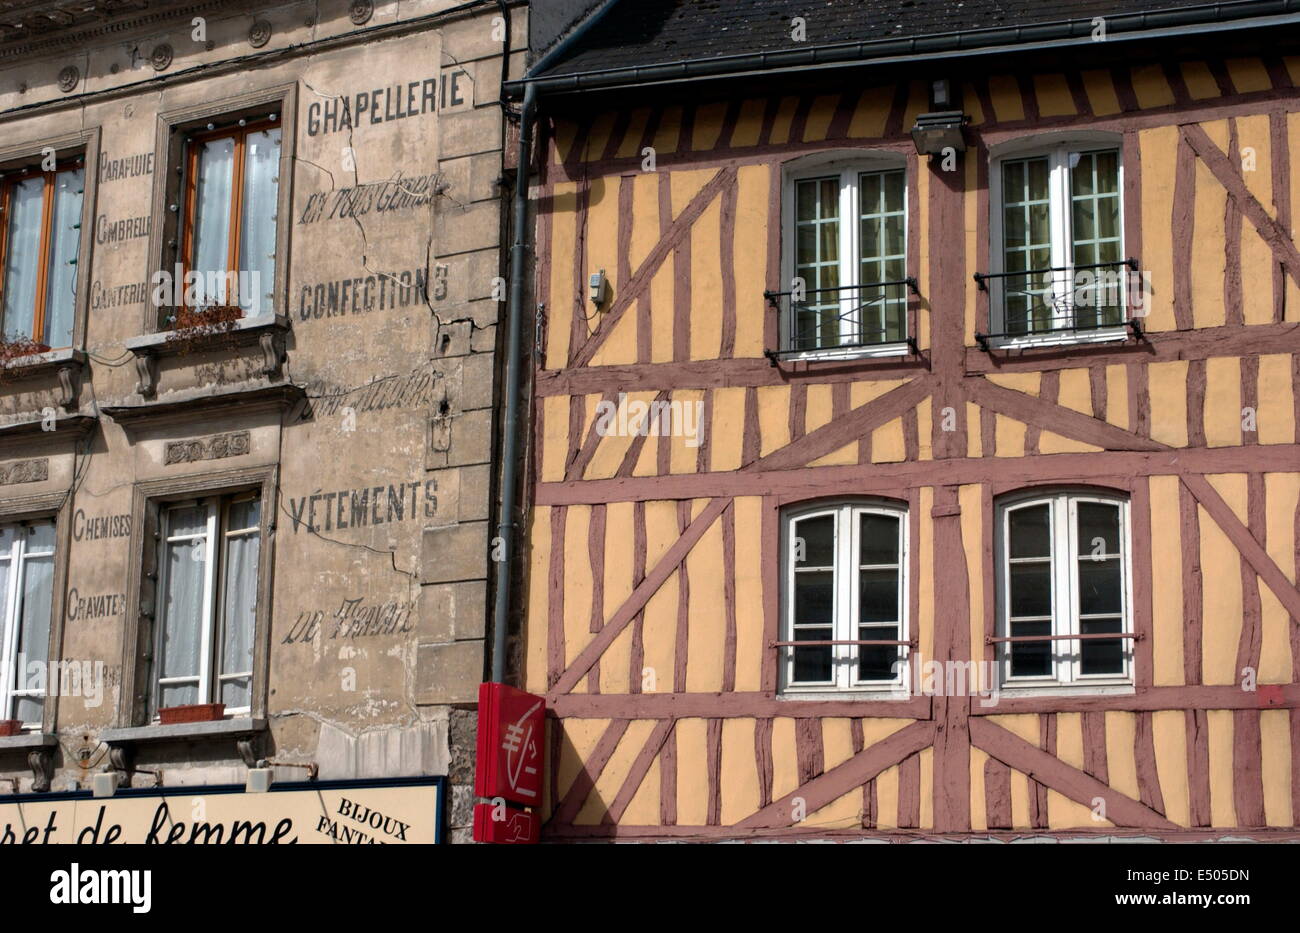 PONT DE L'ARCHE,FRANCE-OLD TIMBER FRAMED BUILDING AND OLD STYLE ADVERTISING  IN THE TOWN. PHOTO:JONATHAN EASTLAND/AJAX Stock Photo - Alamy